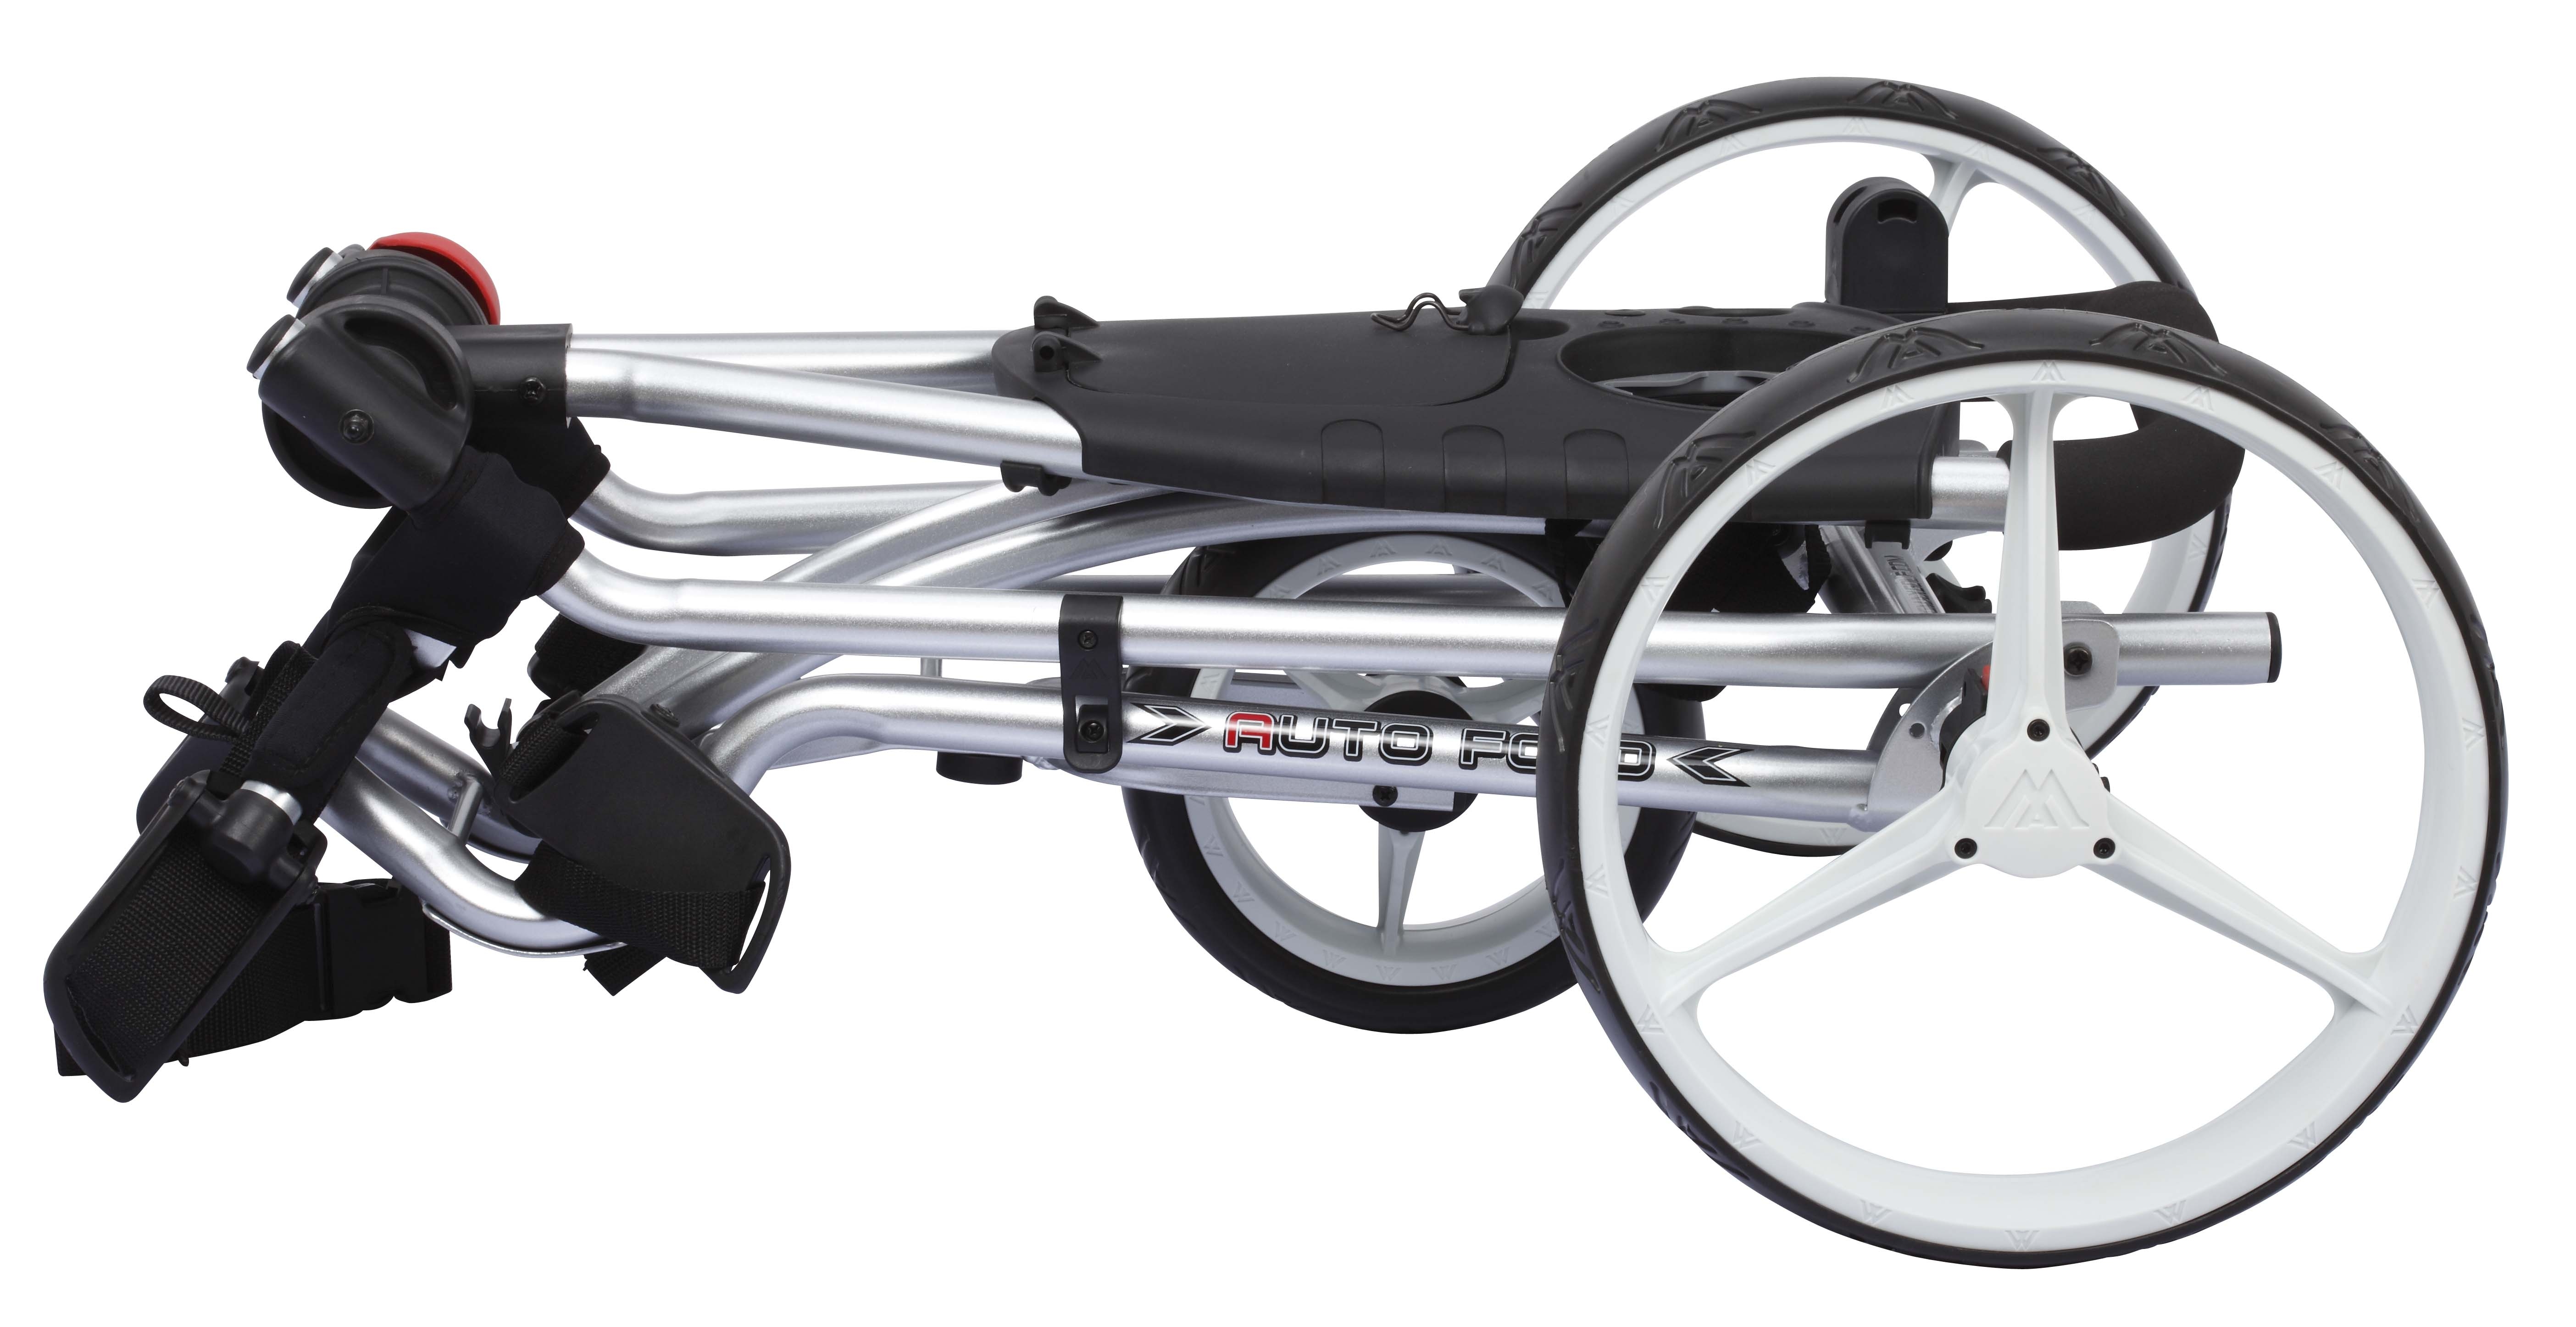 Two new trolley models from Big Max